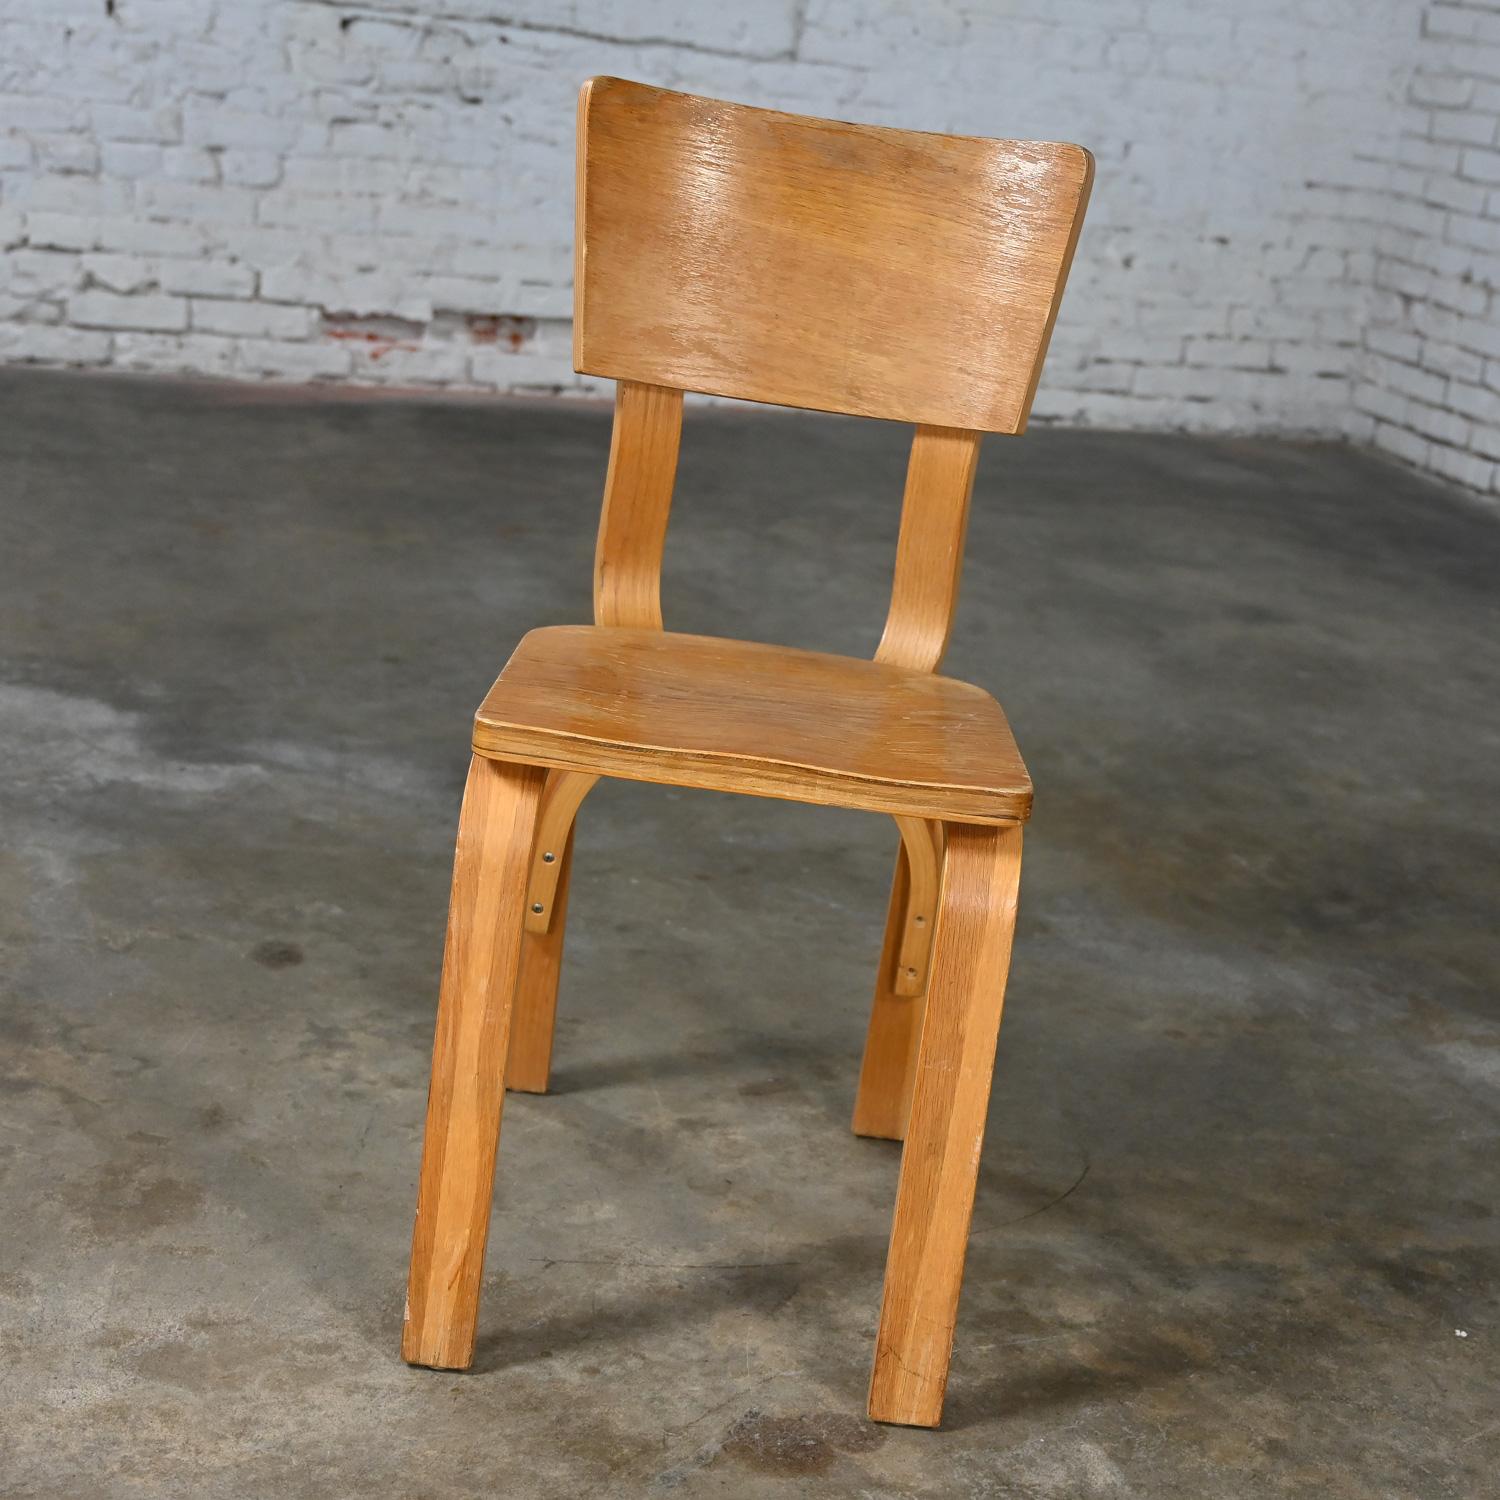 Handsome vintage Mid-Century Modern Thonet #1216-S17-B1 dining chairs comprised of bent oak plywood with saddle seats and a single bow back stretcher 15 available, selling separately & priced per chair, as is condition. See note below regarding